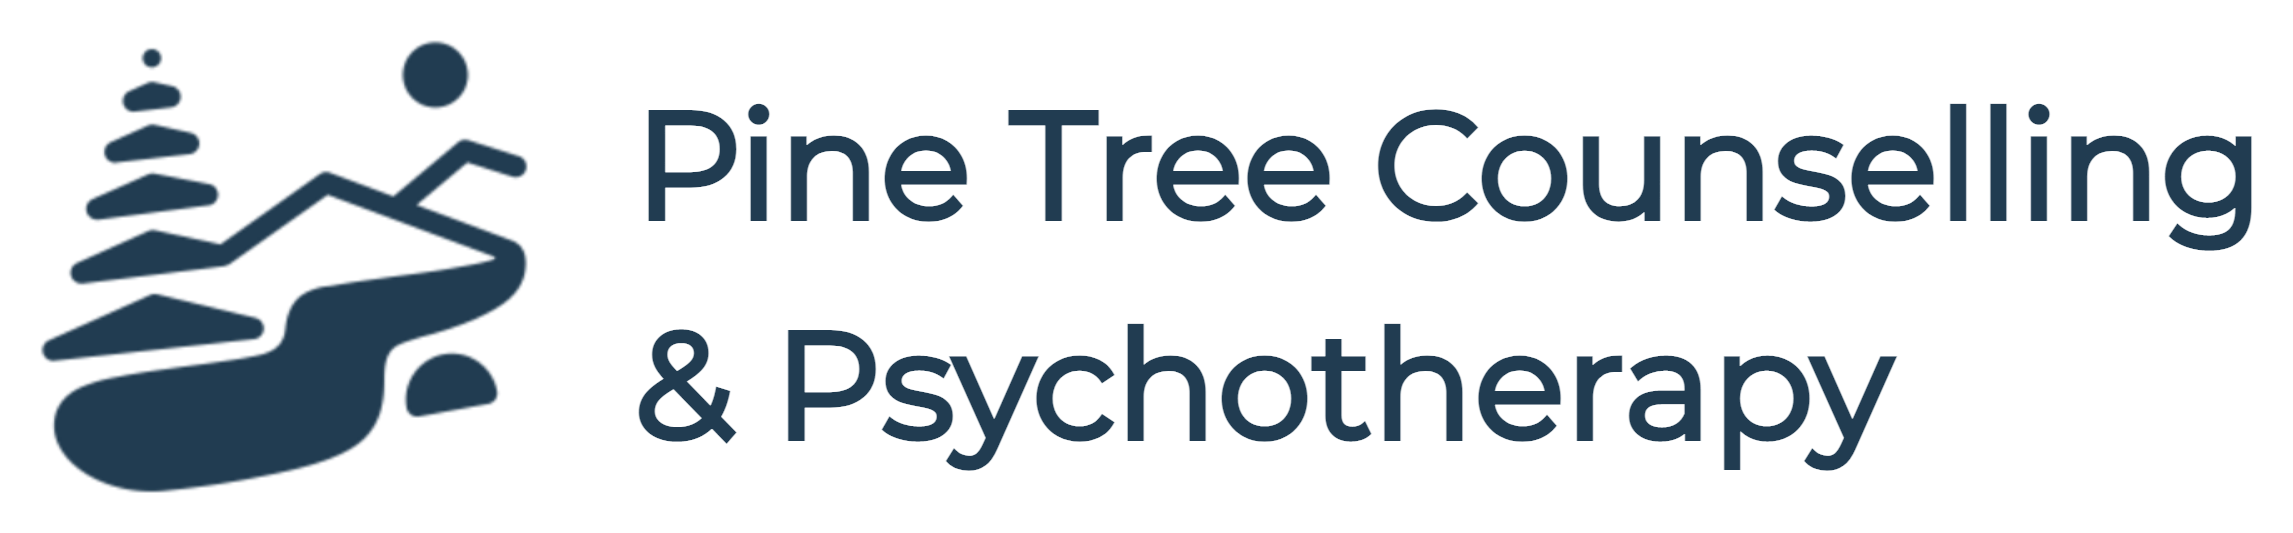 Pine Tree Counselling and Psychotherapy